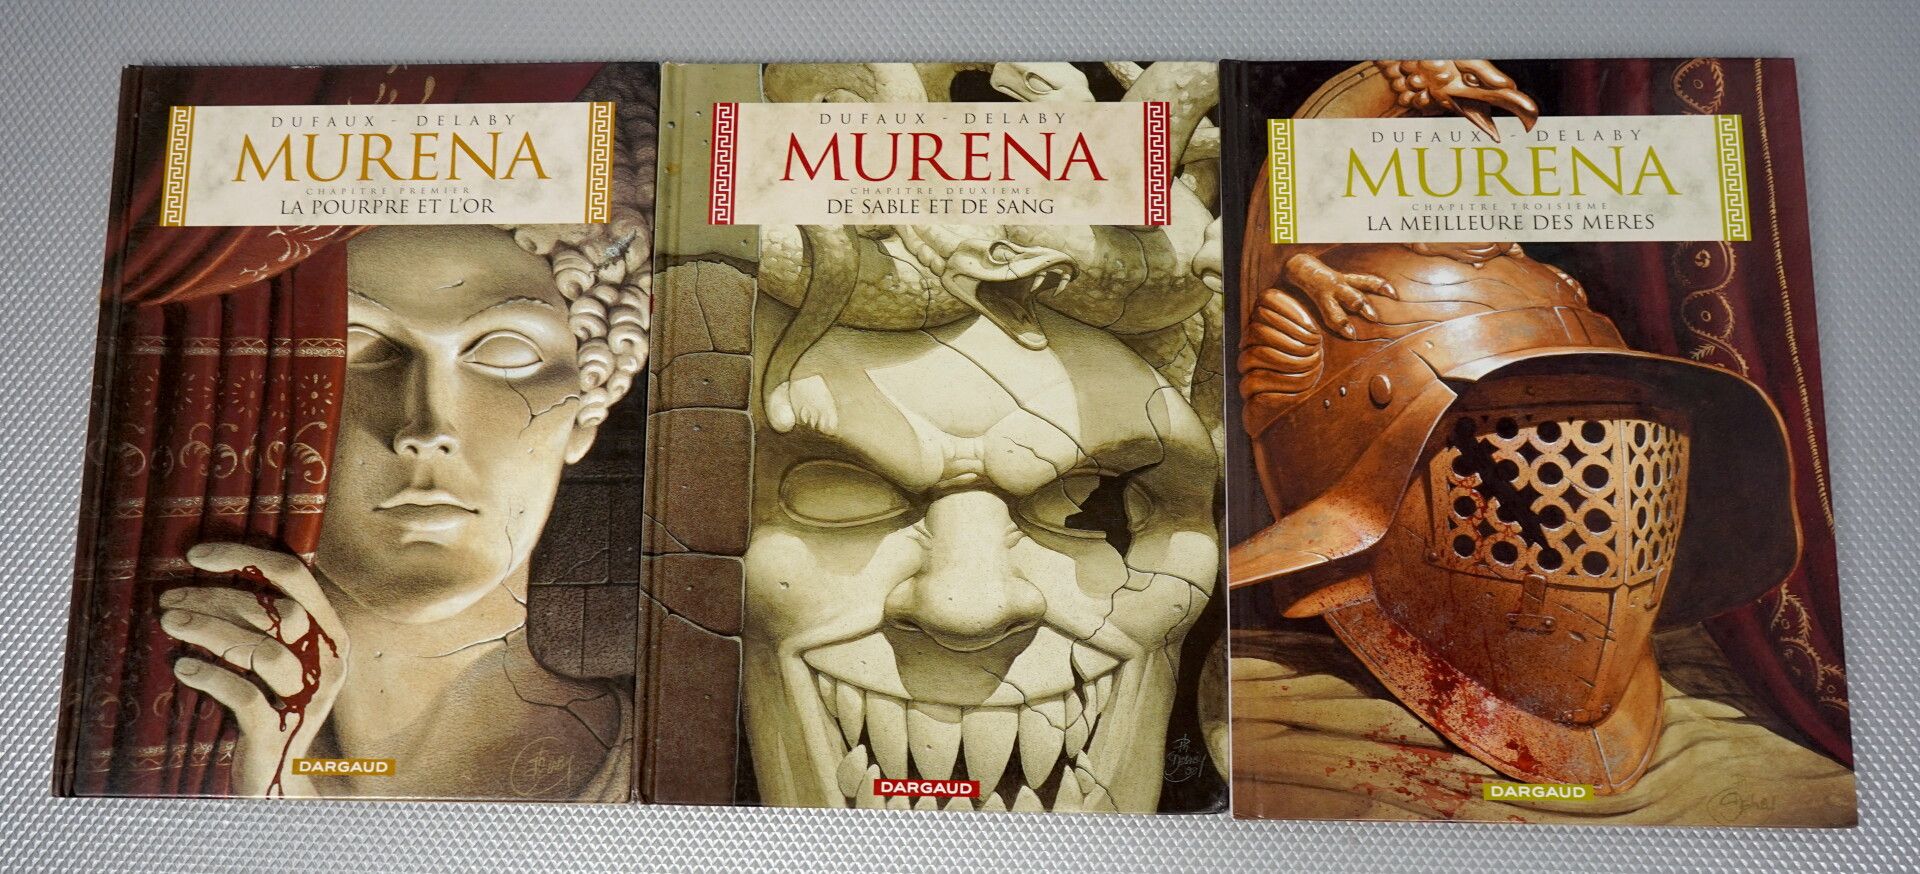 Null MURENA (by Dufaux and Delaby). 9 albums



Volumes 1 to 9 



Volumes 5, 6,&hellip;